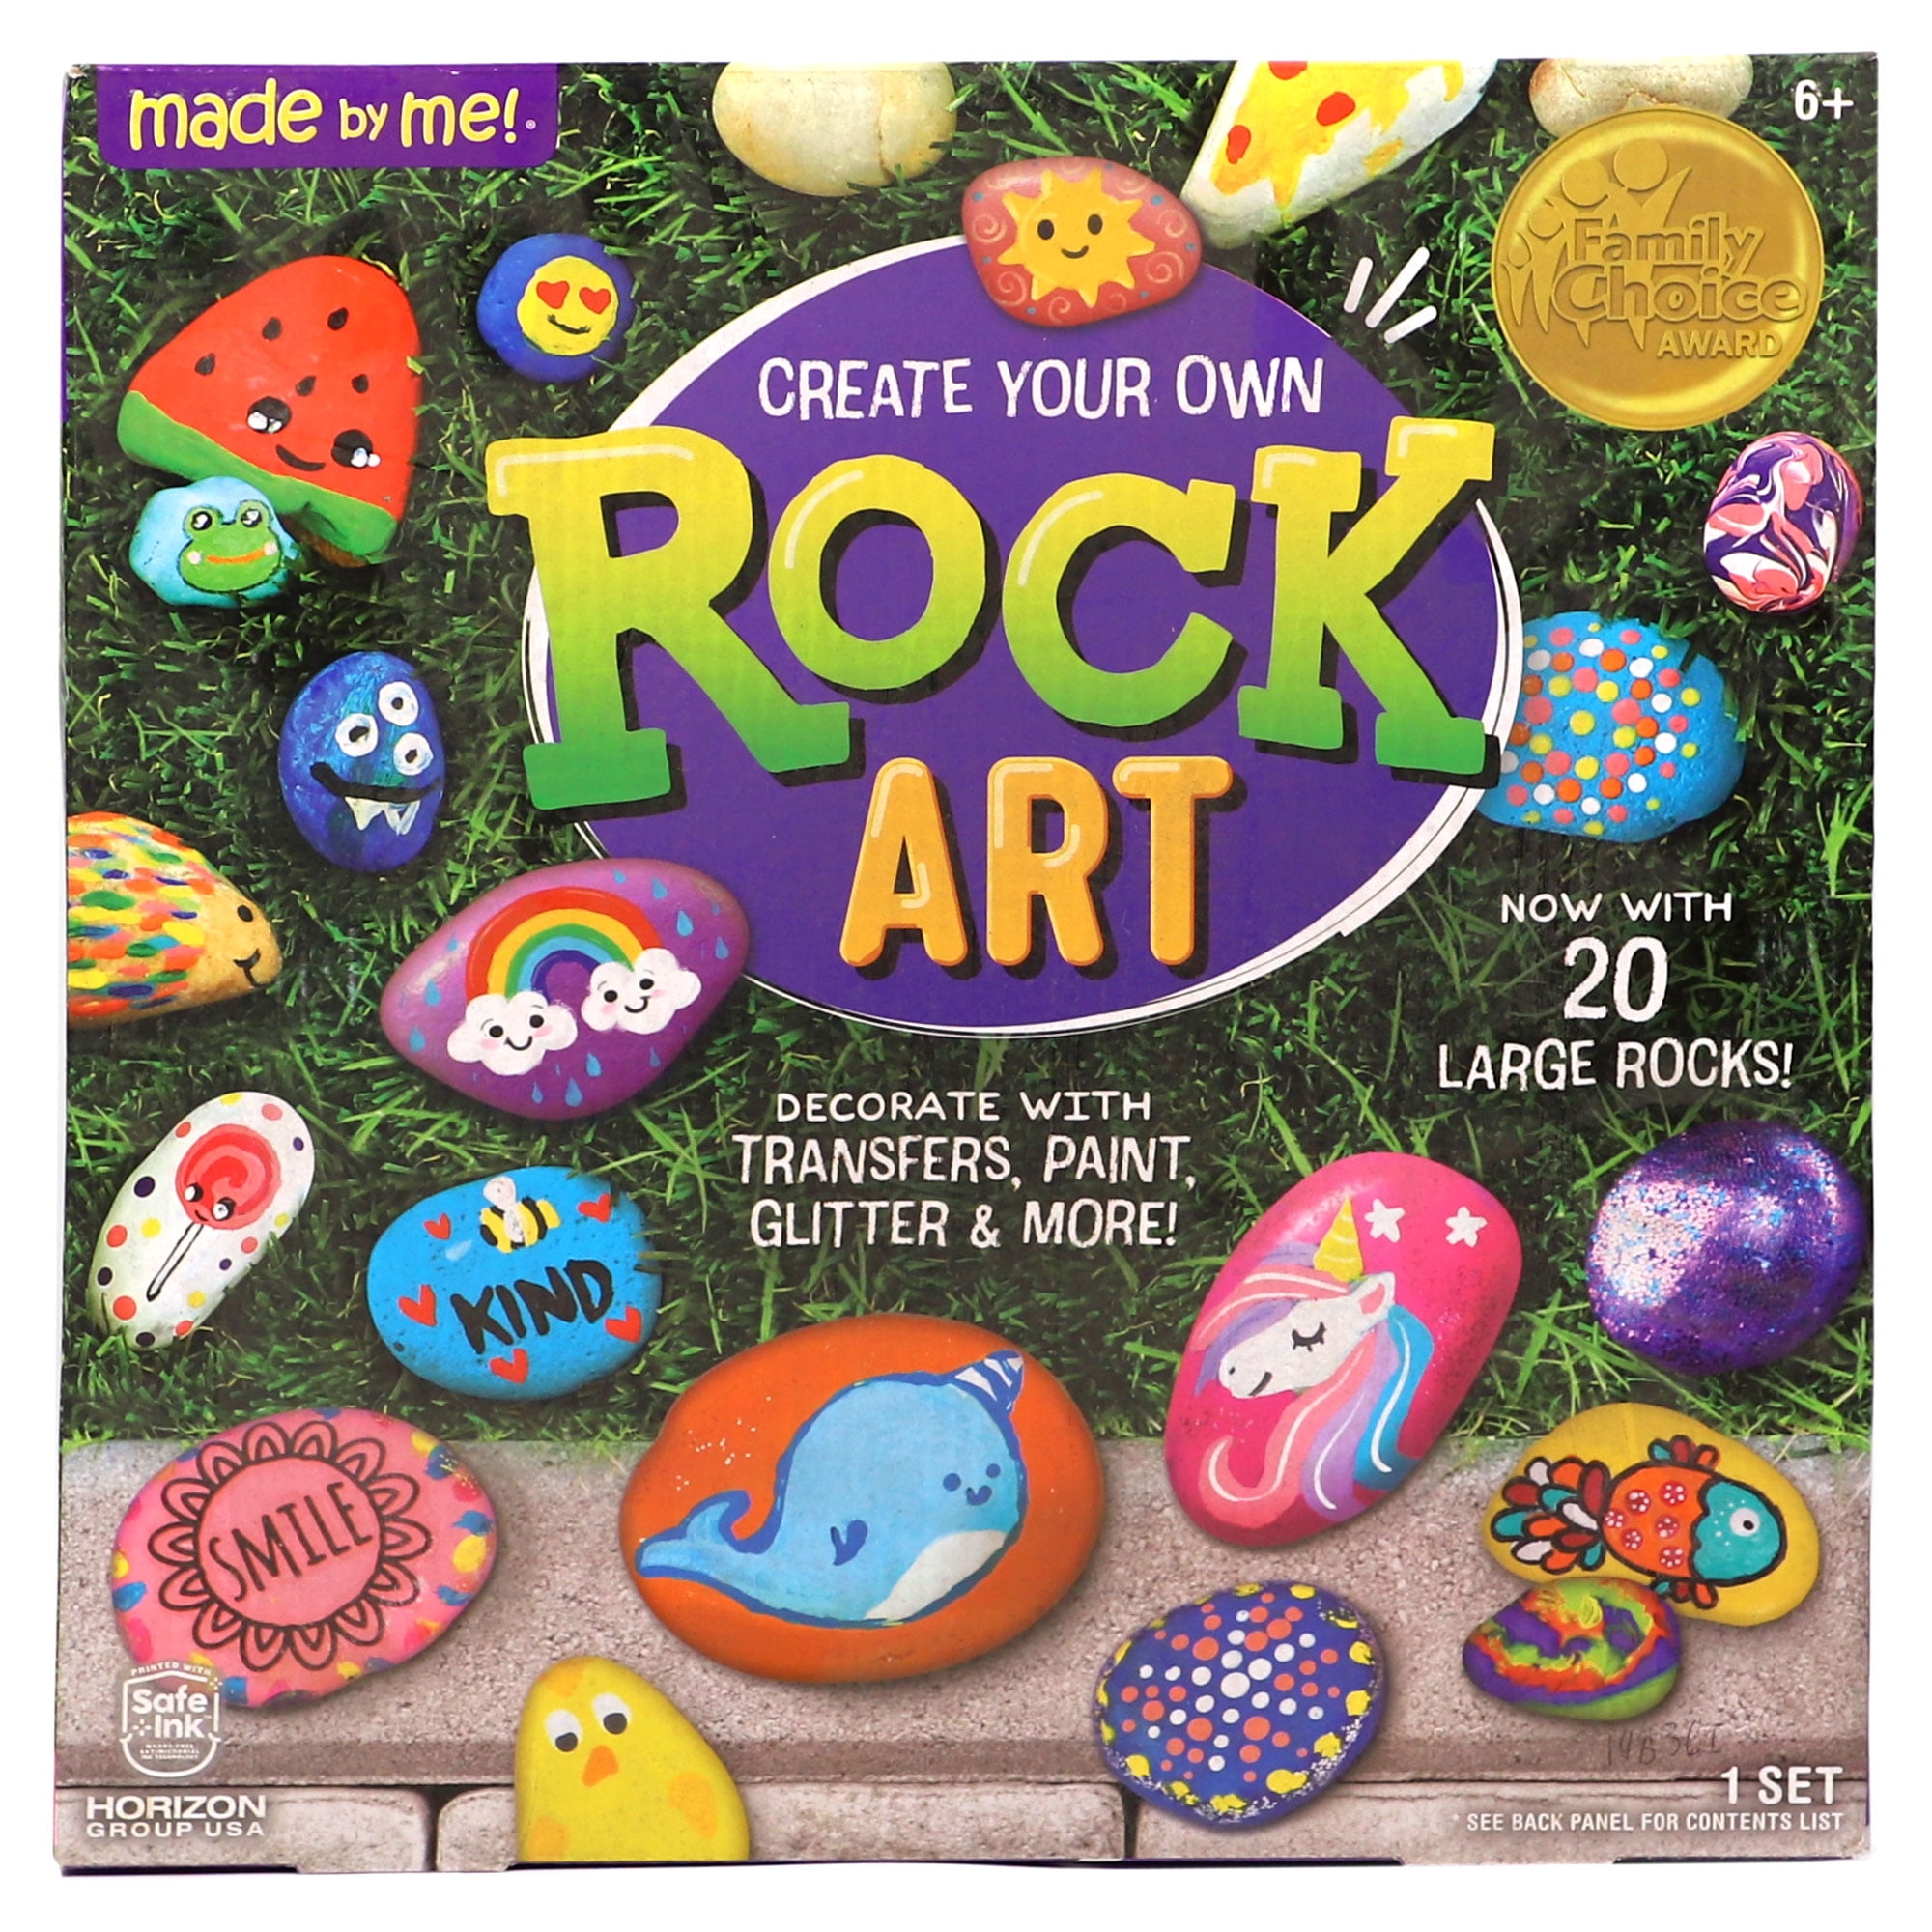 Buy The Complete Neon Rock Art Kit - DIY Rock Painting for Kids - Rocks,  Brushes, Paint, Stencils Included - 19 Easy-to-Follow Projects - Arts and  Craft for Kids Aged 8 to 12